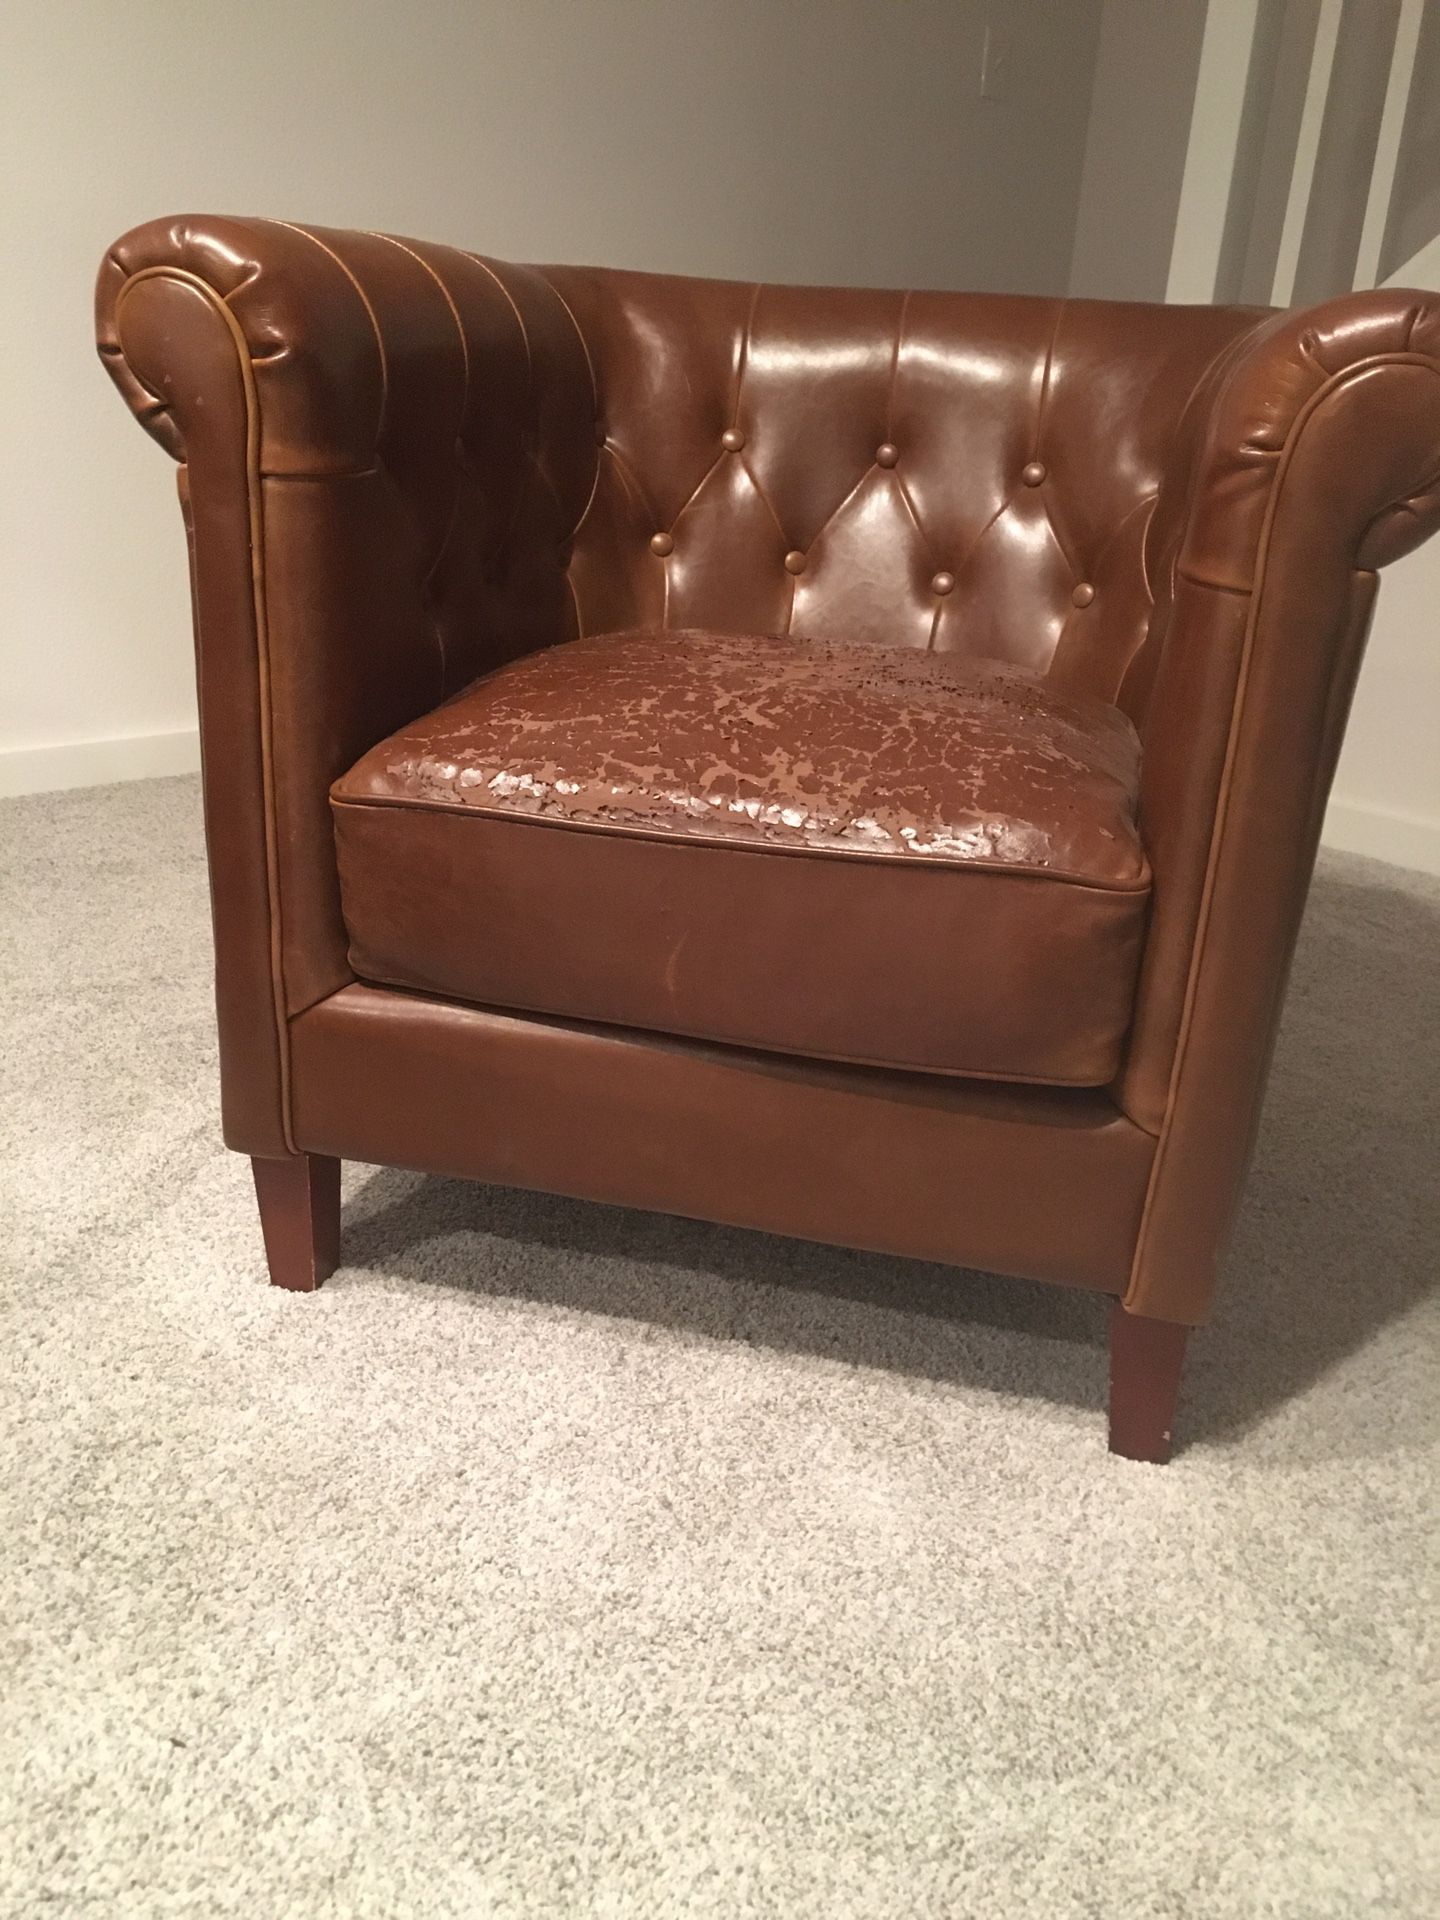 Camel colored leather chair - free